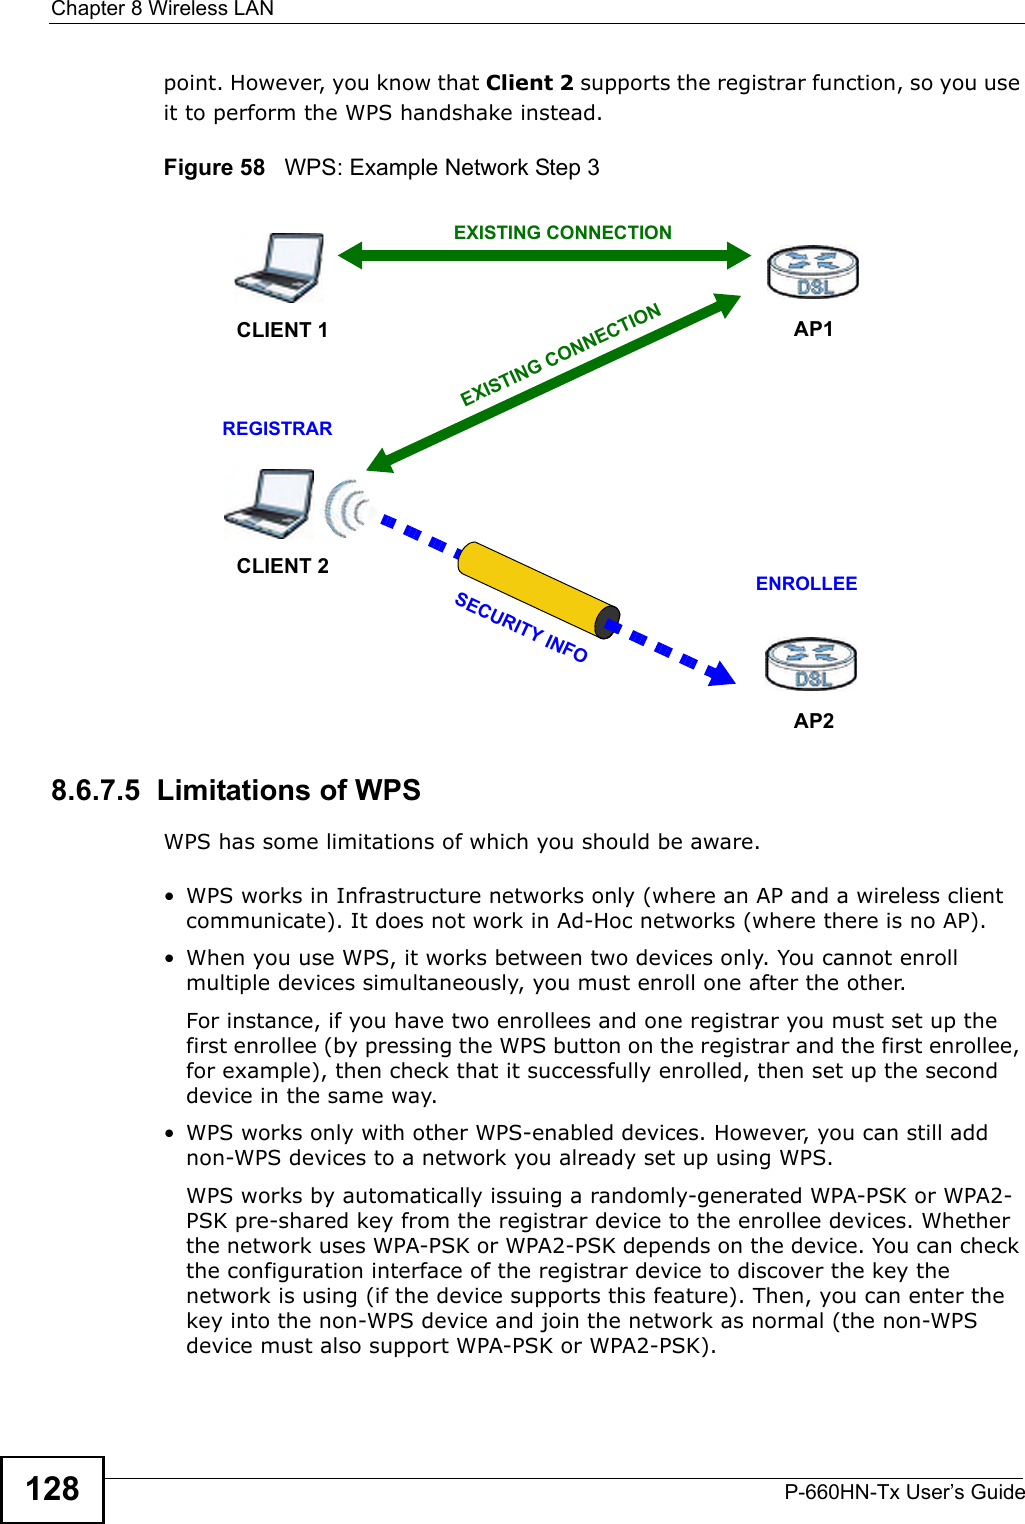 Chapter 8 Wireless LANP-660HN-Tx User’s Guide128point. However, you know that Client 2 supports the registrar function, so you use it to perform the WPS handshake instead.Figure 58   WPS: Example Network Step 38.6.7.5  Limitations of WPSWPS has some limitations of which you should be aware. • WPS works in Infrastructure networks only (where an AP and a wireless client communicate). It does not work in Ad-Hoc networks (where there is no AP).• When you use WPS, it works between two devices only. You cannot enroll multiple devices simultaneously, you must enroll one after the other. For instance, if you have two enrollees and one registrar you must set up the first enrollee (by pressing the WPS button on the registrar and the first enrollee, for example), then check that it successfully enrolled, then set up the second device in the same way.• WPS works only with other WPS-enabled devices. However, you can still add non-WPS devices to a network you already set up using WPS. WPS works by automatically issuing a randomly-generated WPA-PSK or WPA2-PSK pre-shared key from the registrar device to the enrollee devices. Whether the network uses WPA-PSK or WPA2-PSK depends on the device. You can check the configuration interface of the registrar device to discover the key the network is using (if the device supports this feature). Then, you can enter the key into the non-WPS device and join the network as normal (the non-WPS device must also support WPA-PSK or WPA2-PSK).CLIENT 1 AP1REGISTRARCLIENT 2EXISTING CONNECTIONSECURITY INFOENROLLEEAP2EXISTING CONNECTION